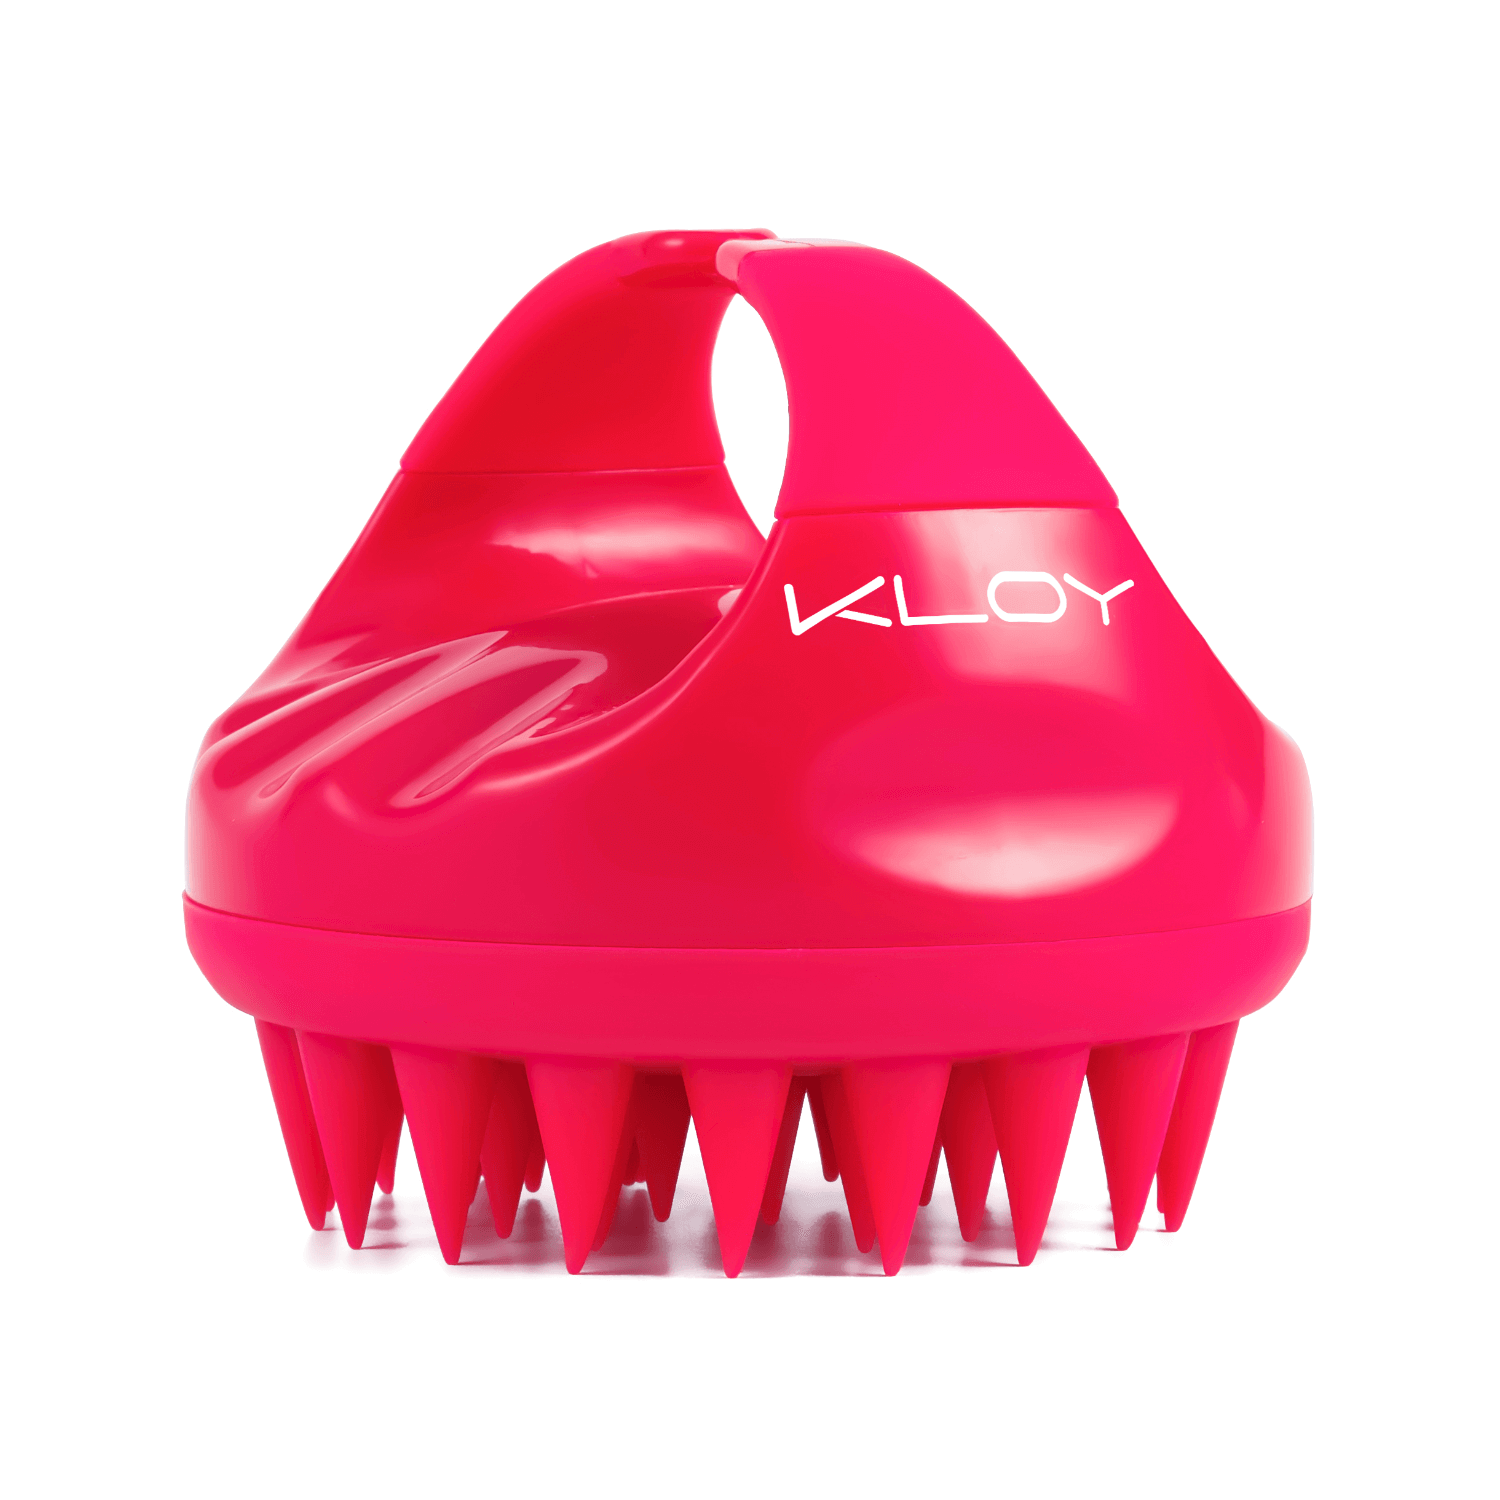 Combo of Kloy Hair Massage Brush - Pink & Red